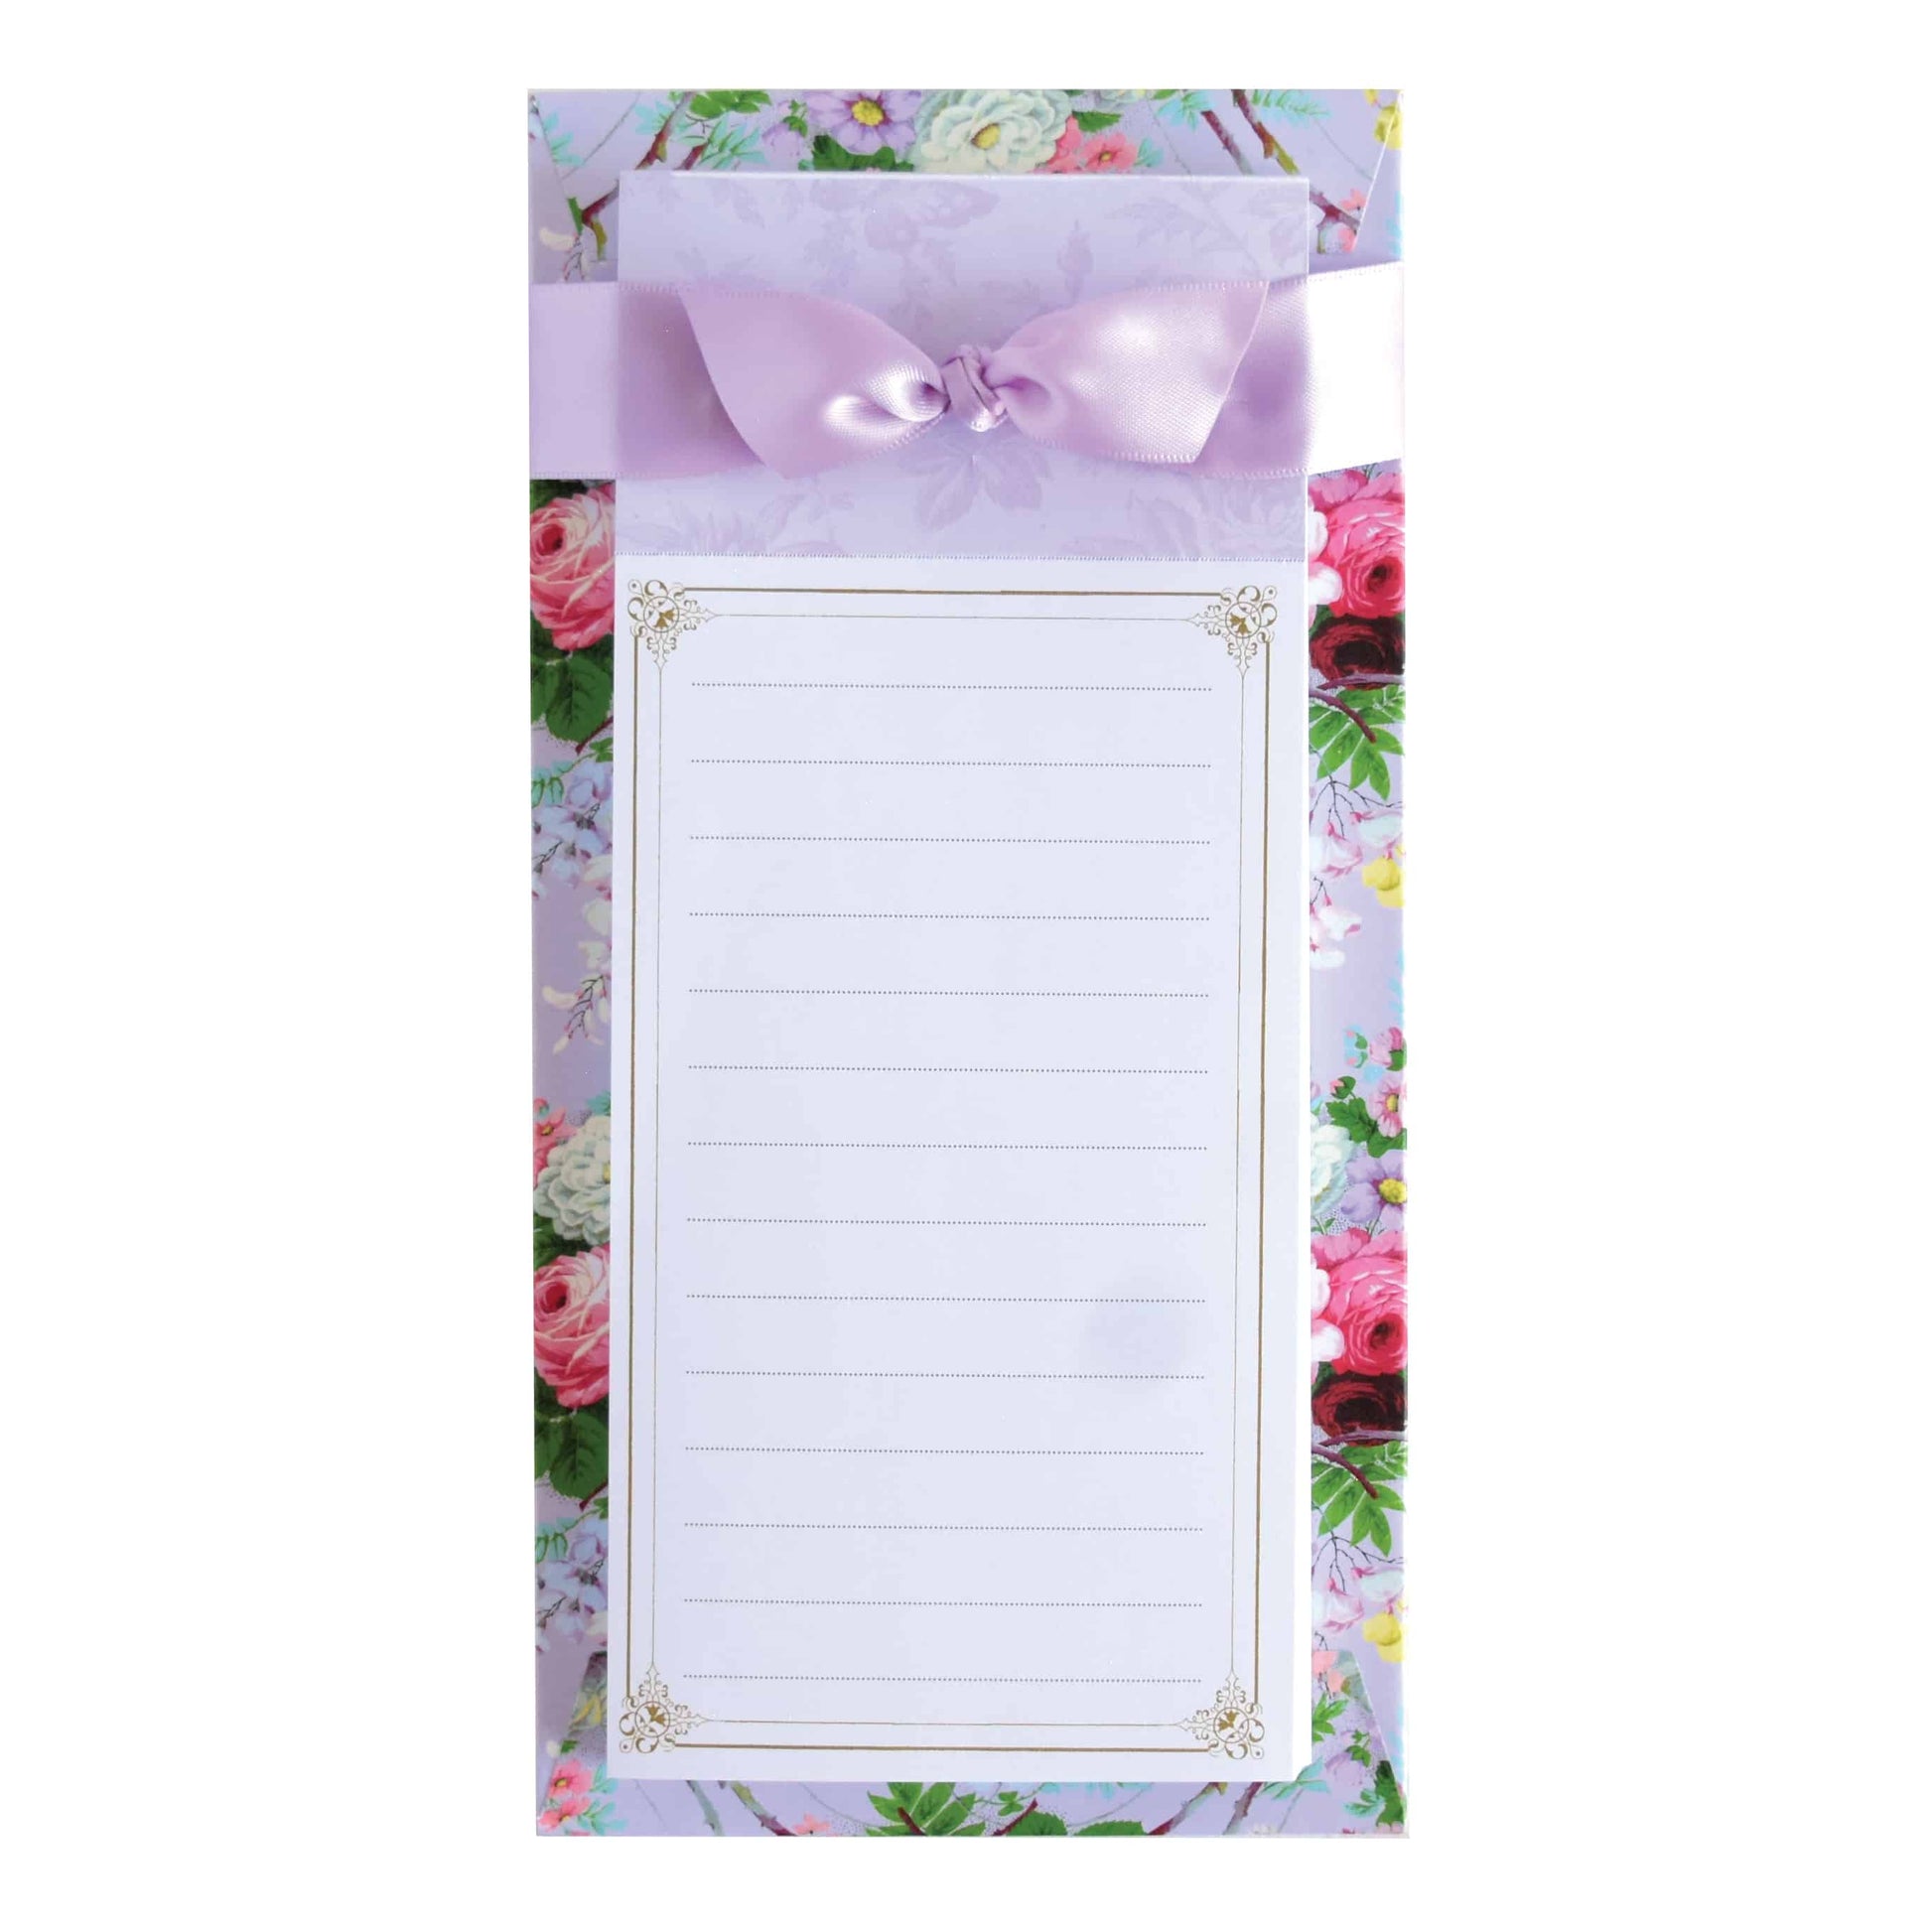 a notepad with a pink bow on it.